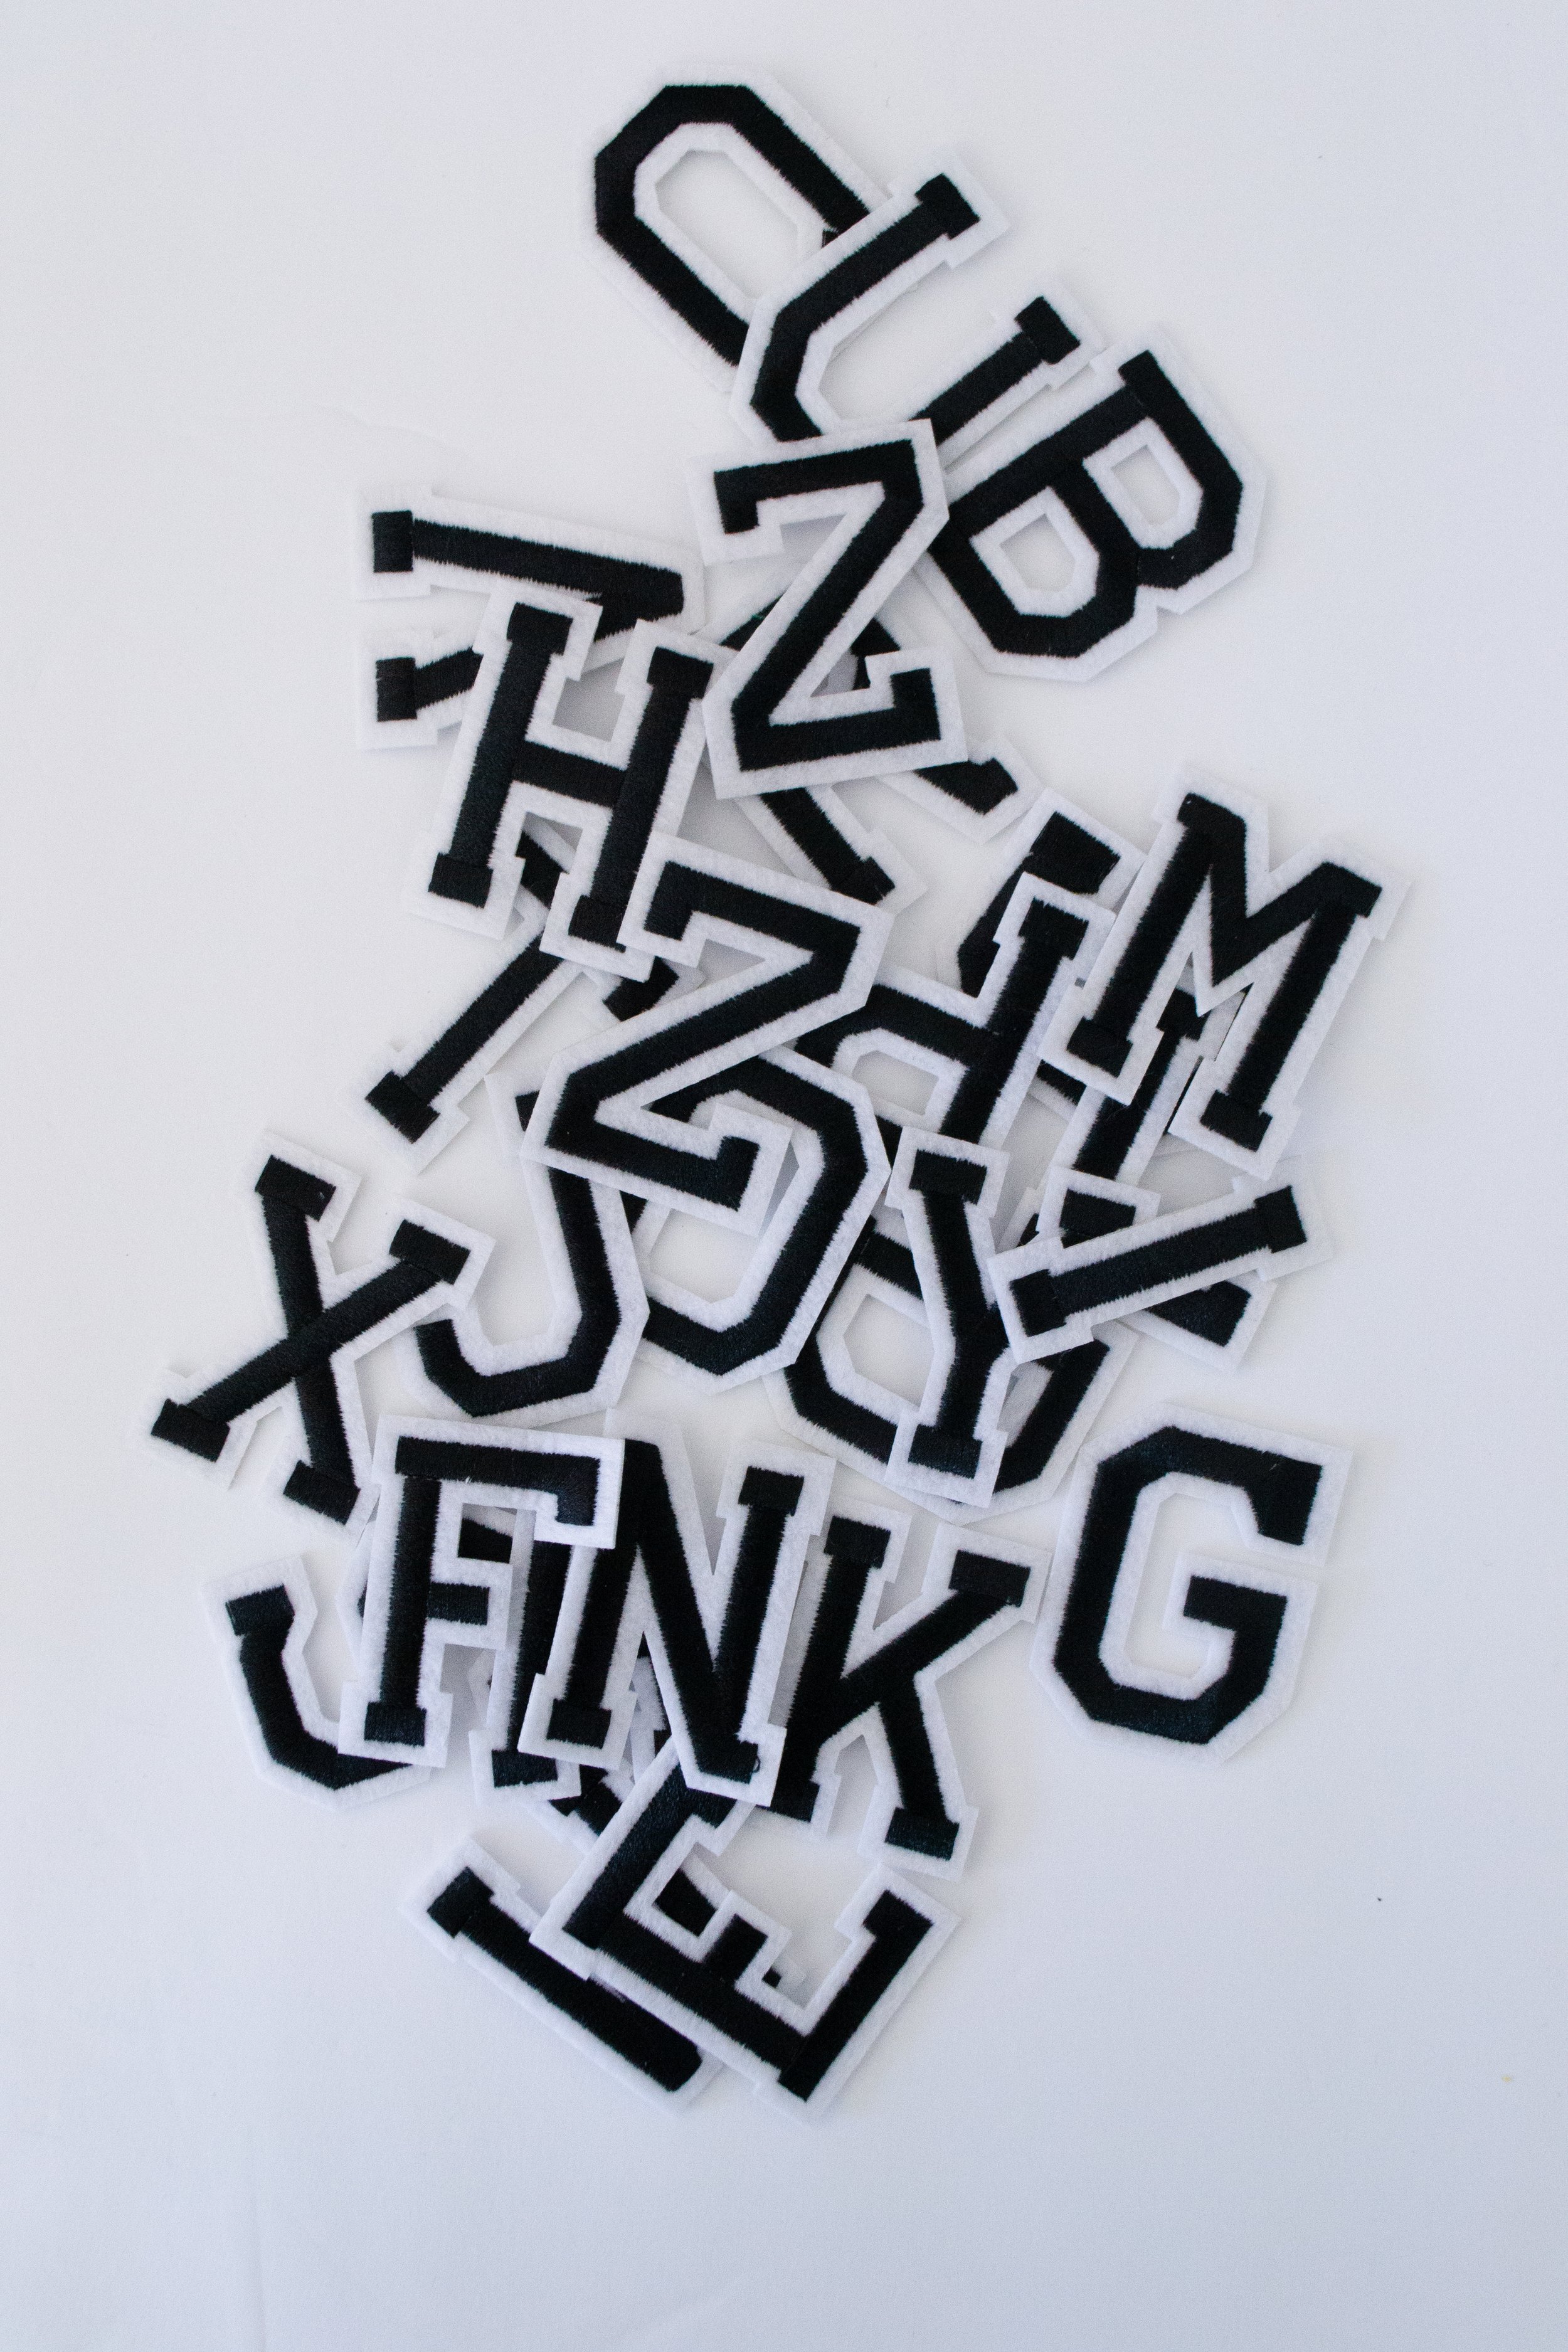 12 Packs: 104 ct. (1,248 total) Black Foam Alphabet Stickers by  Recollections™ 